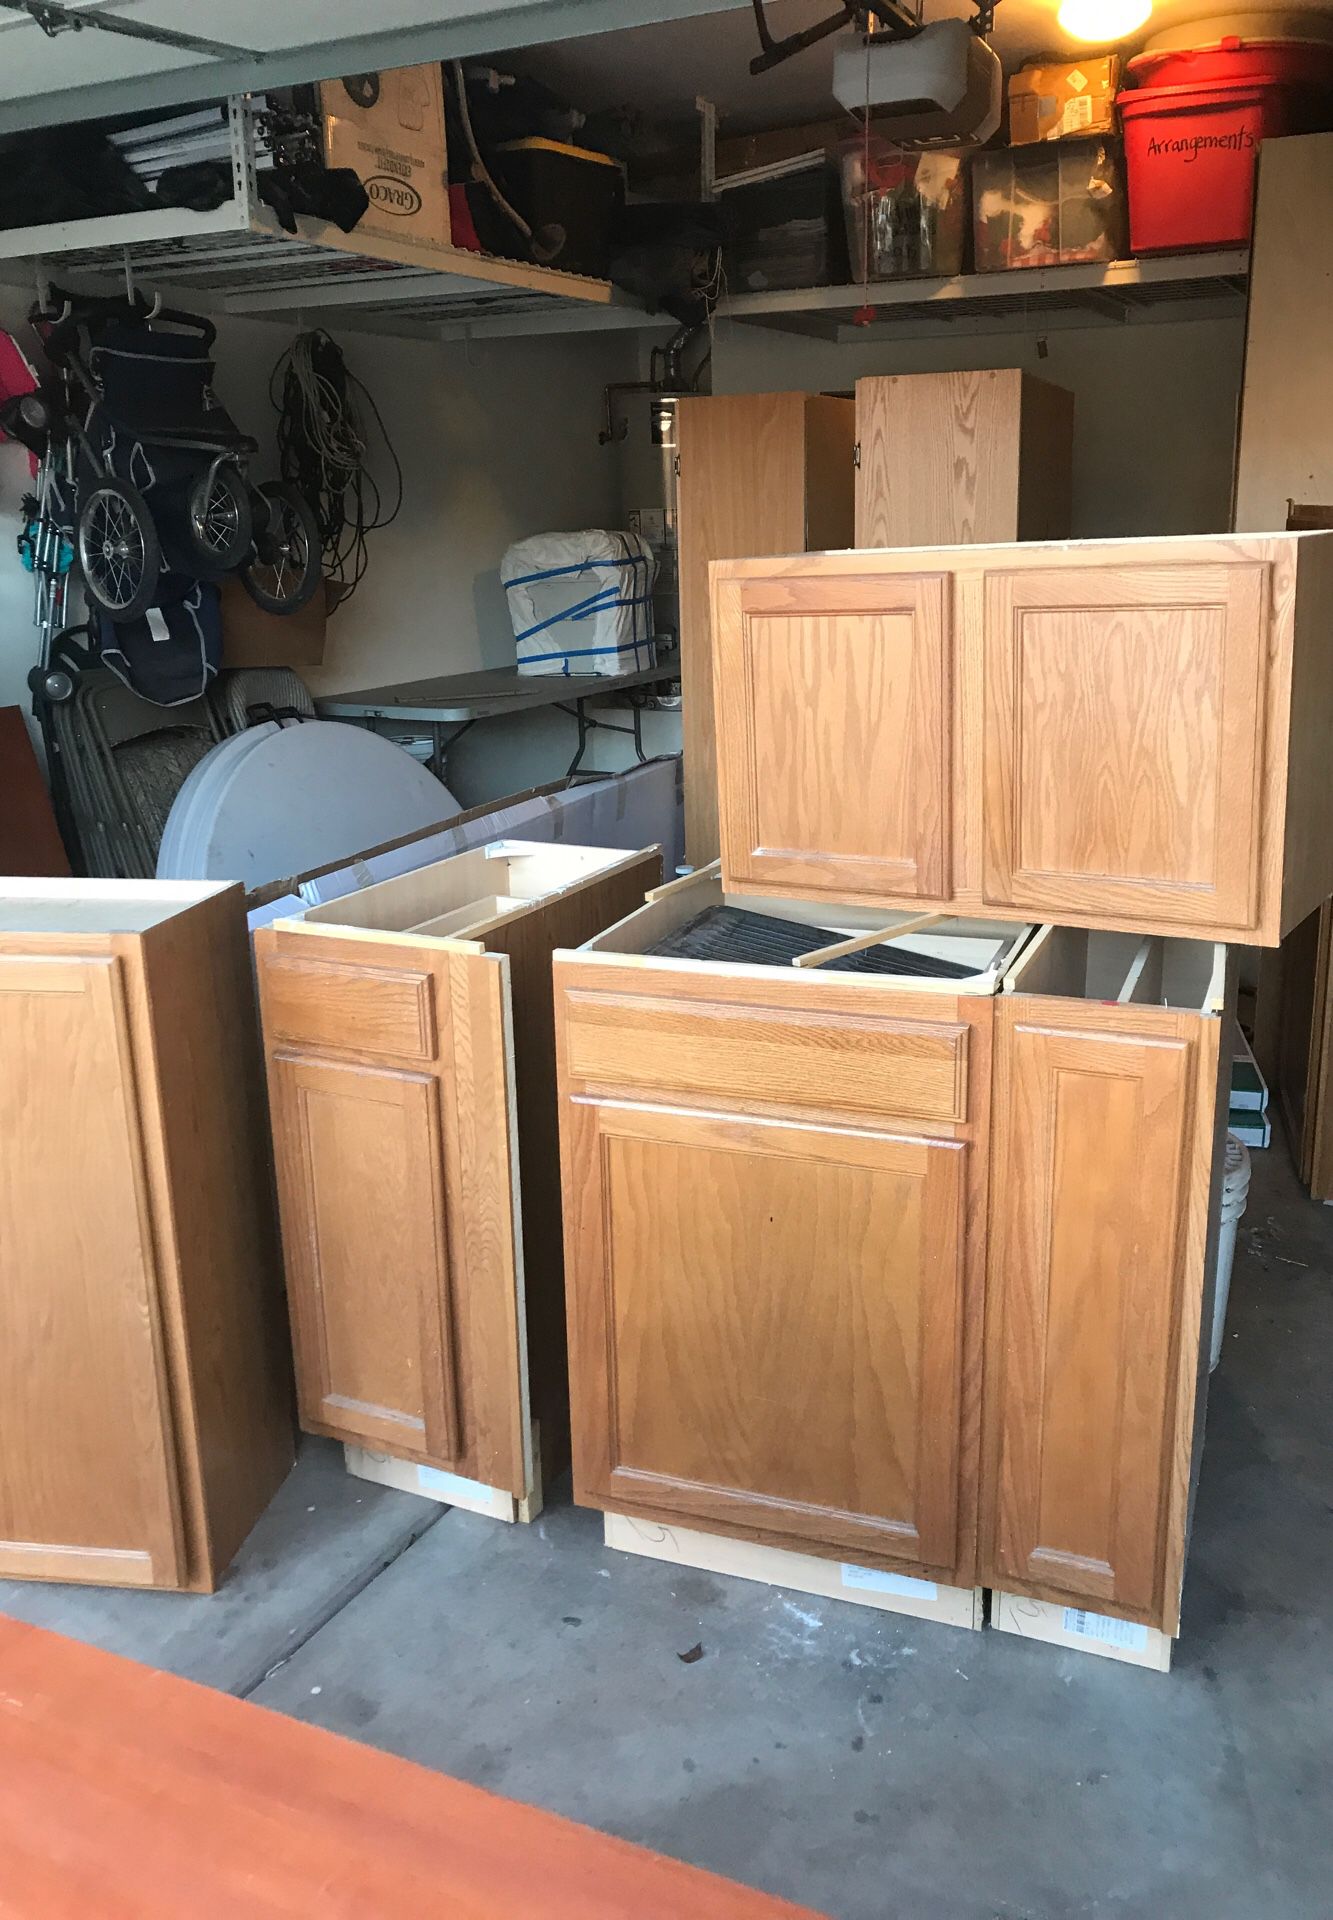 Oak cabinets that can help you add more storage or a new look to your kitchen can all be yours for $275